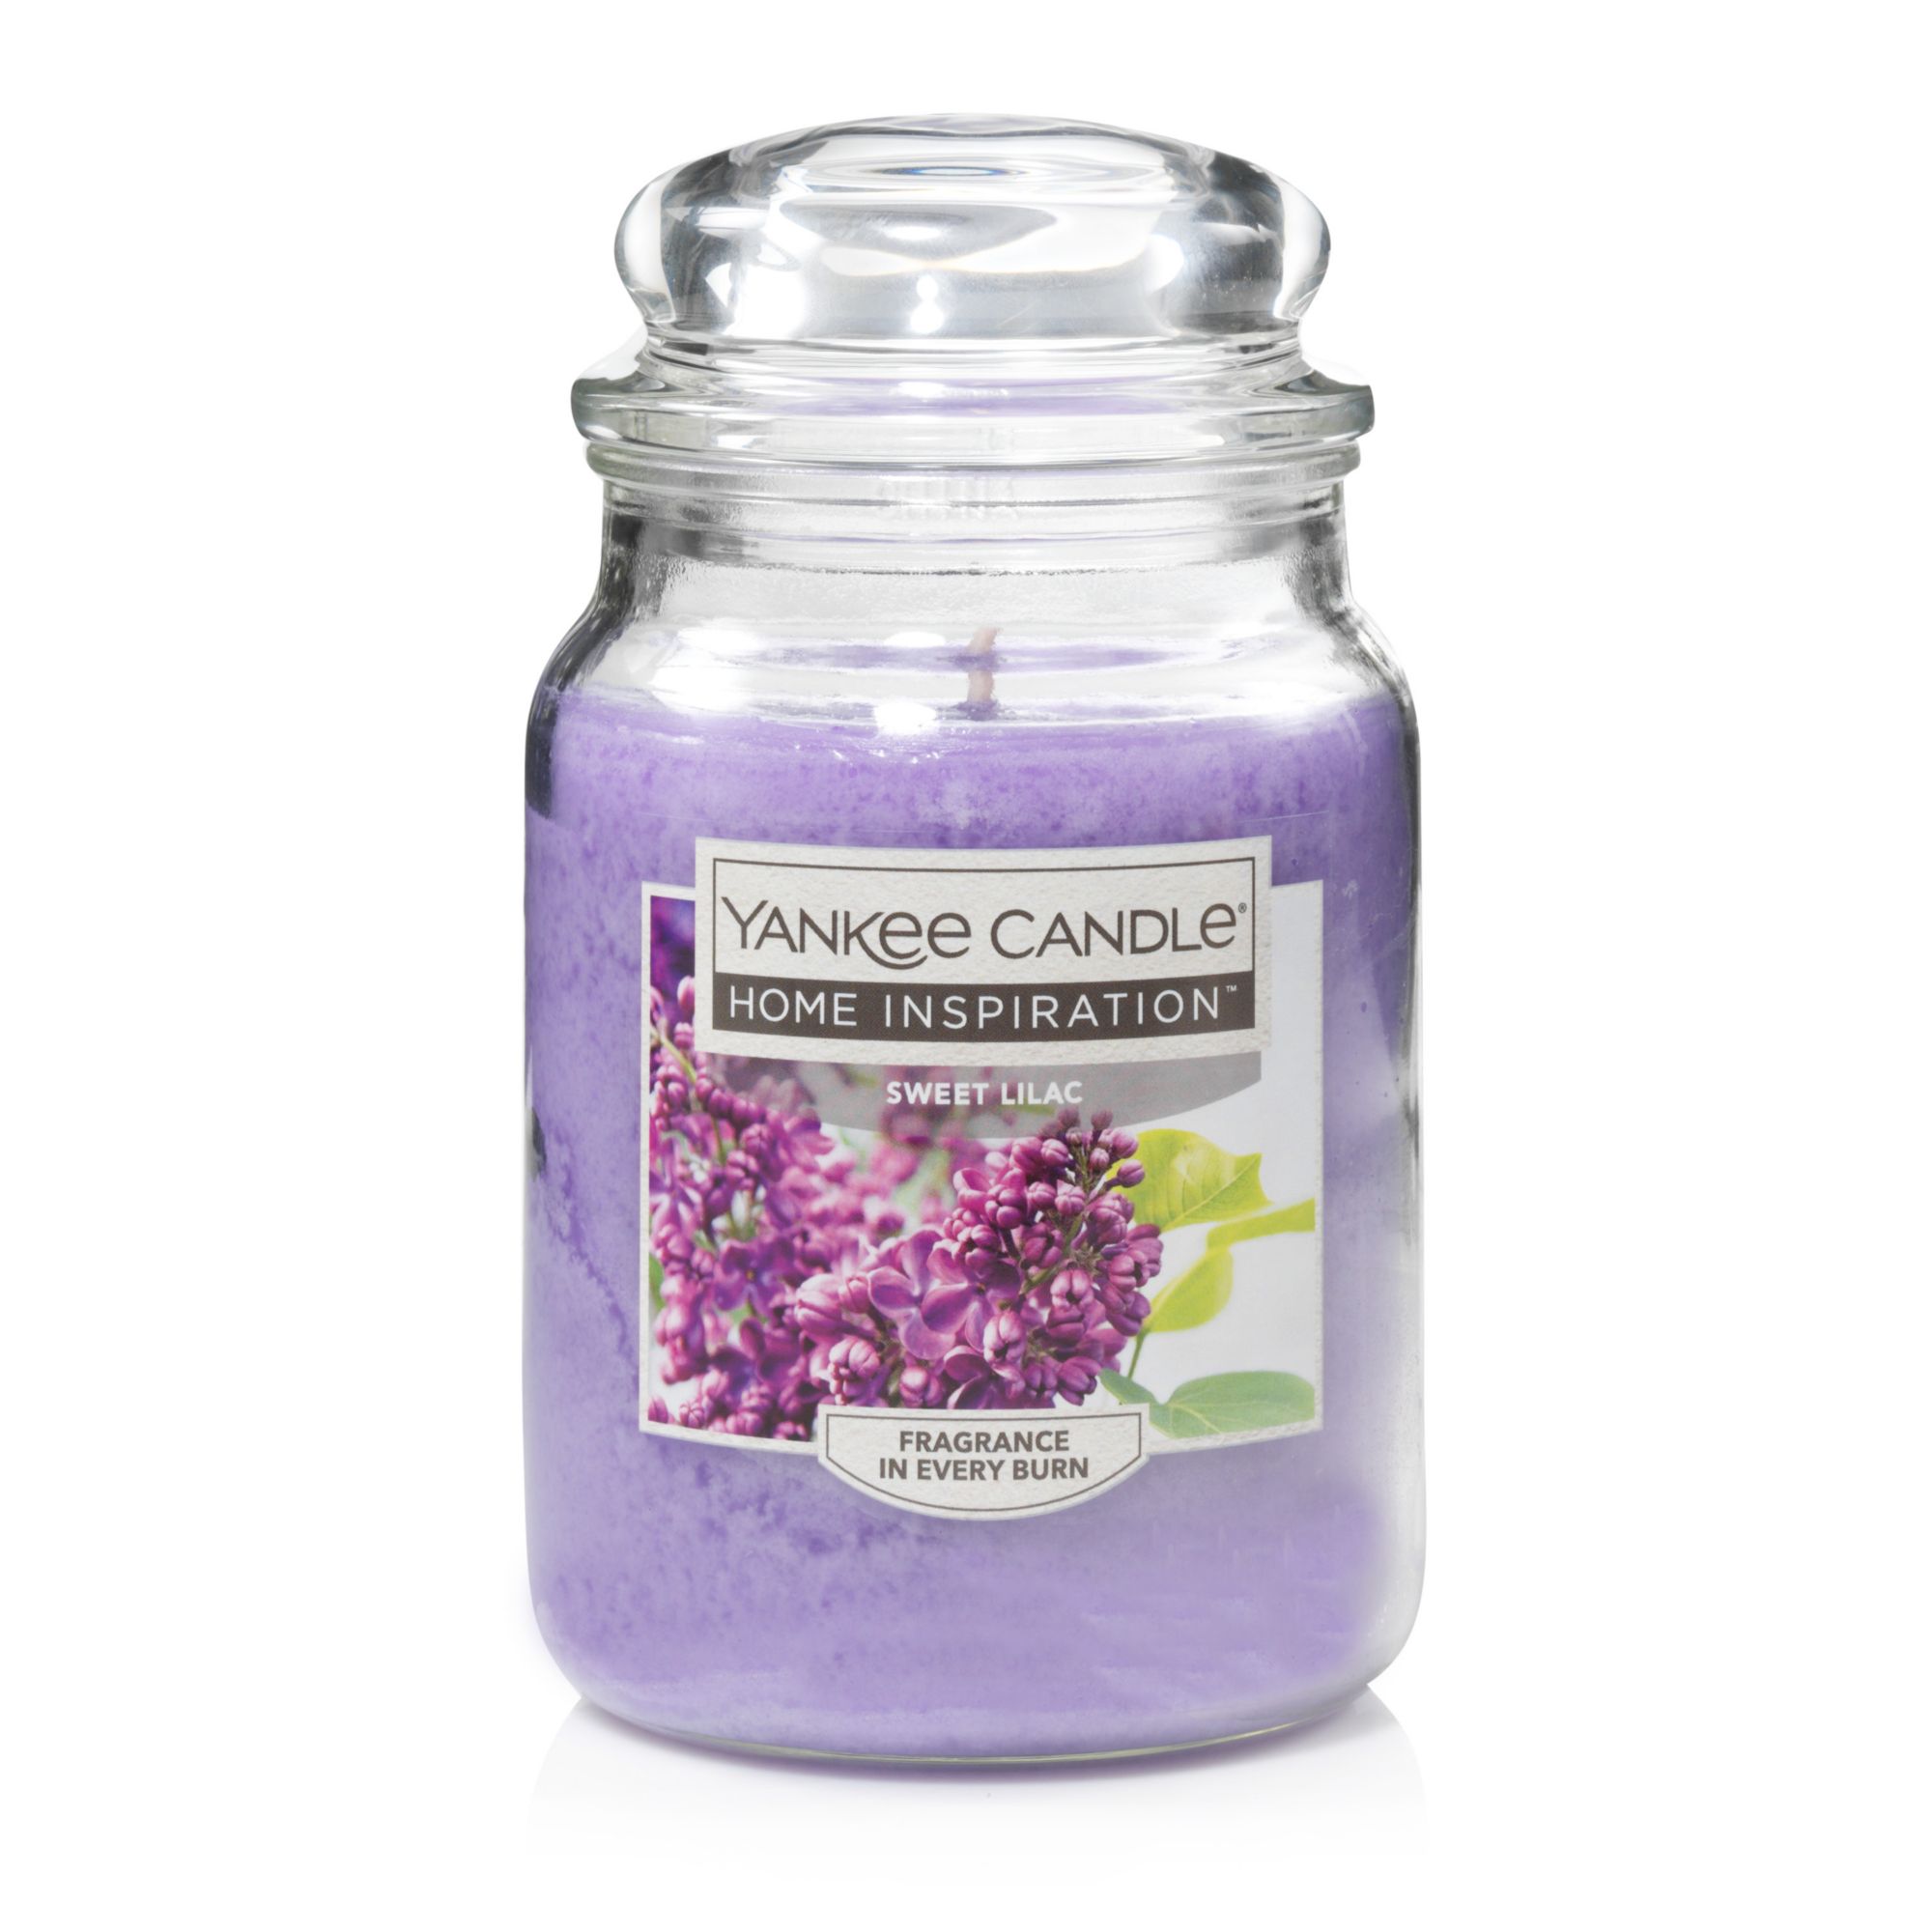 Yankee Candle® Lilac Blossom Gift Set